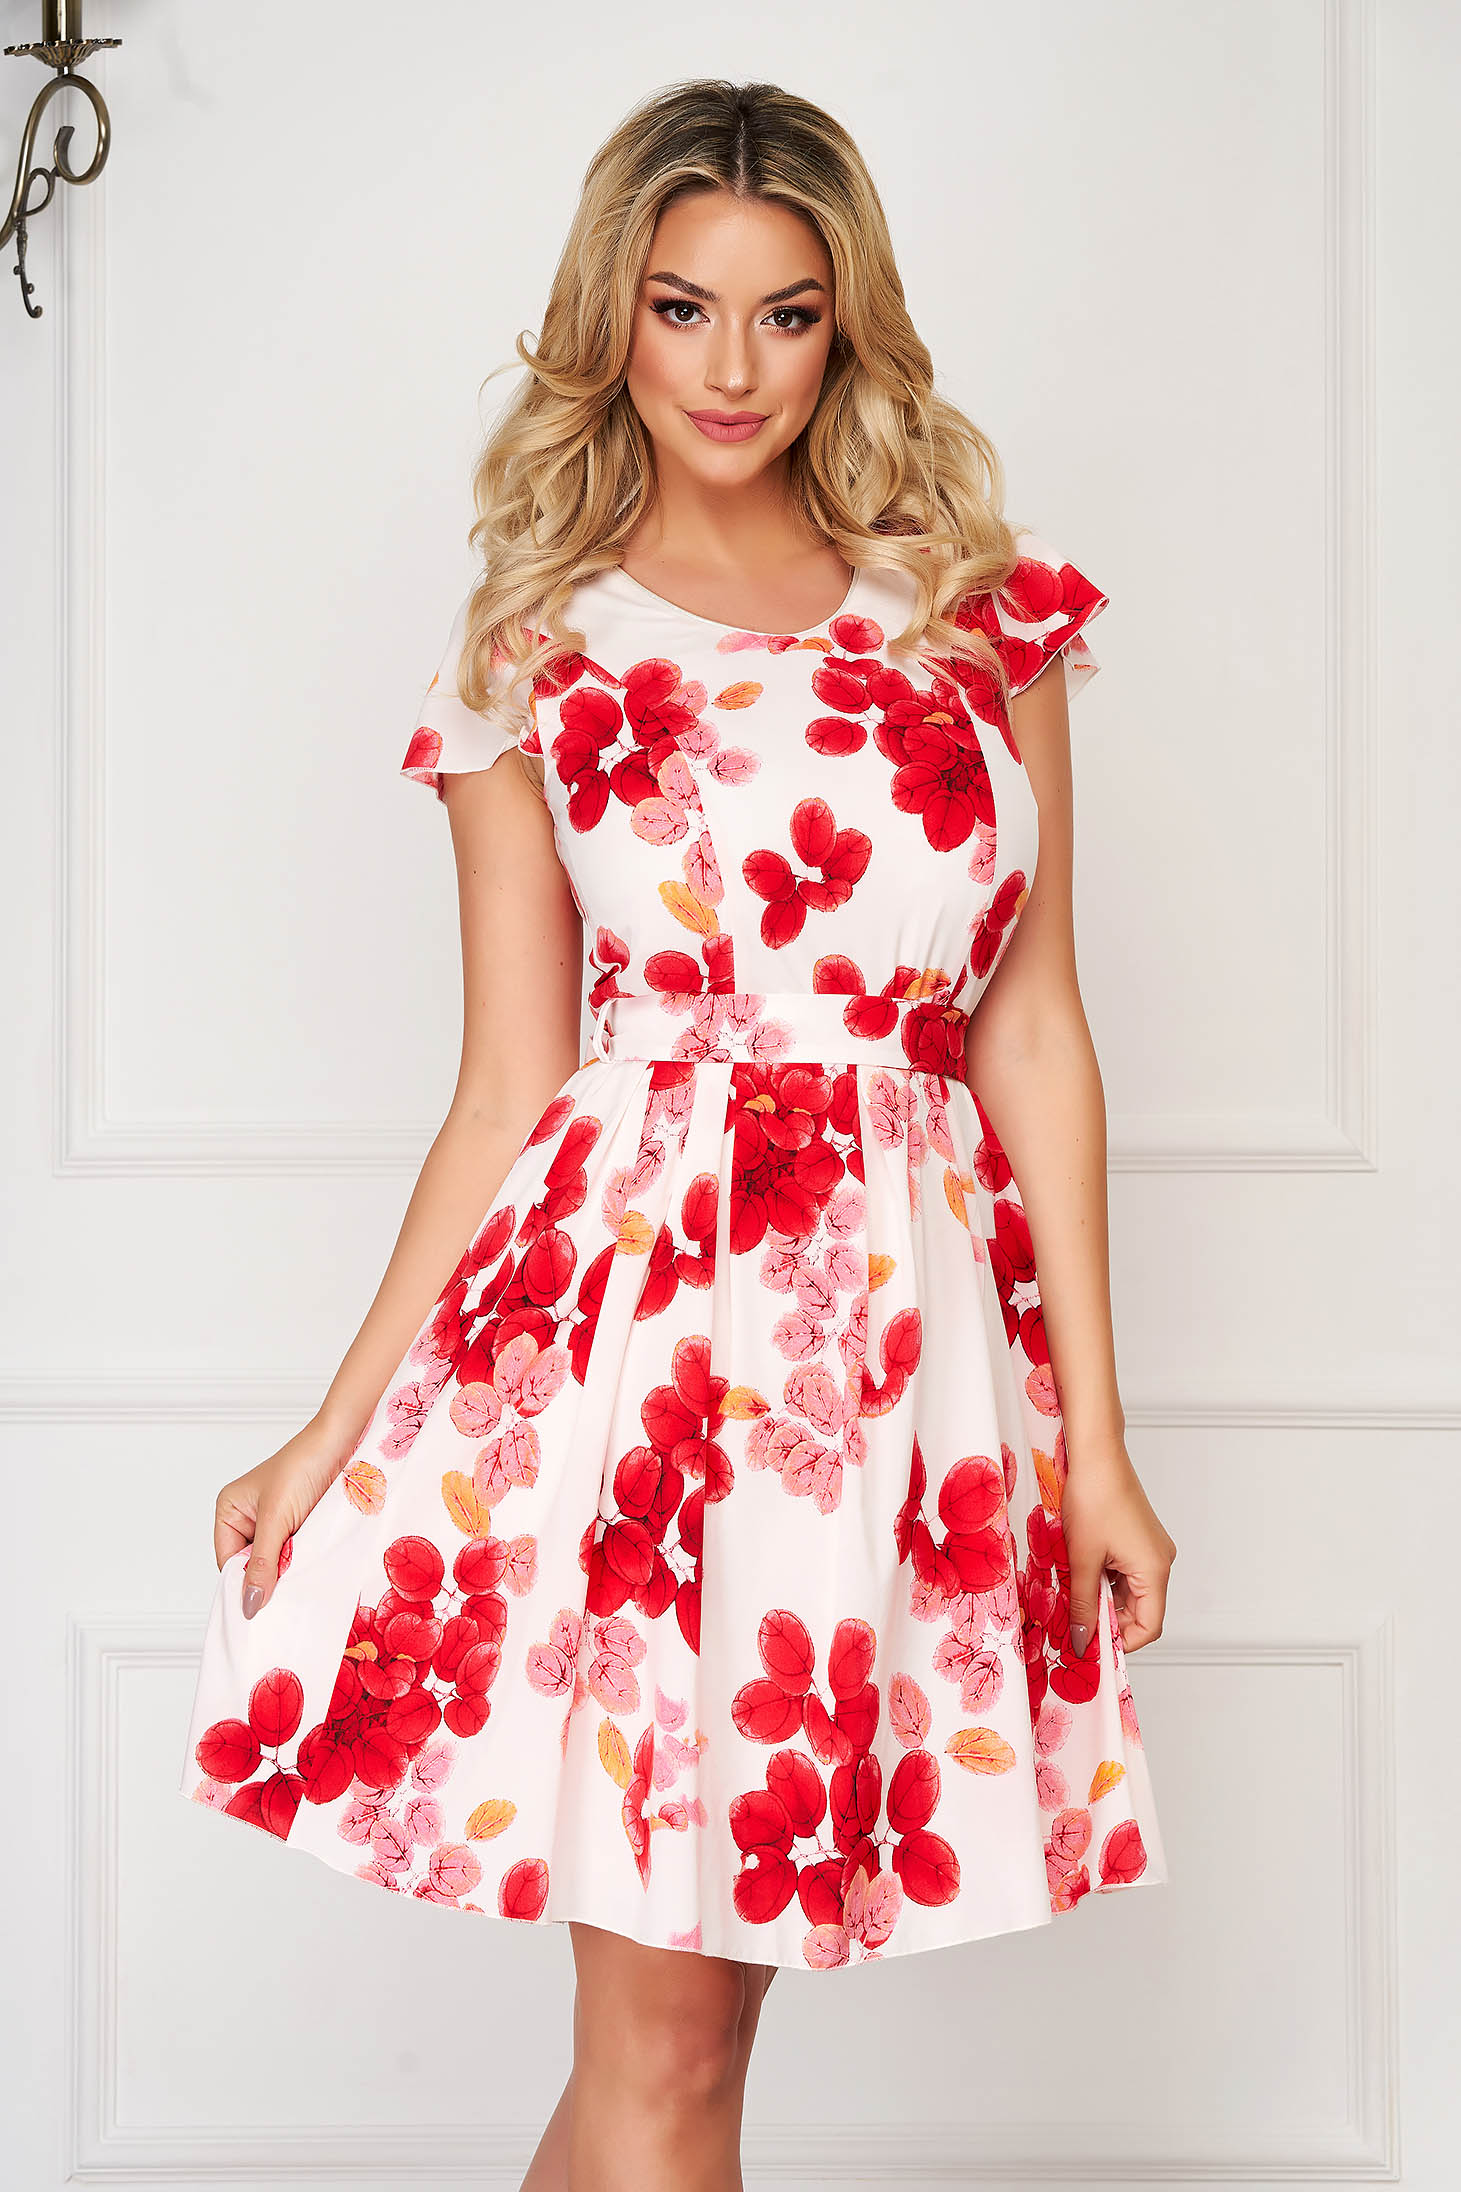 white dress with red floral print